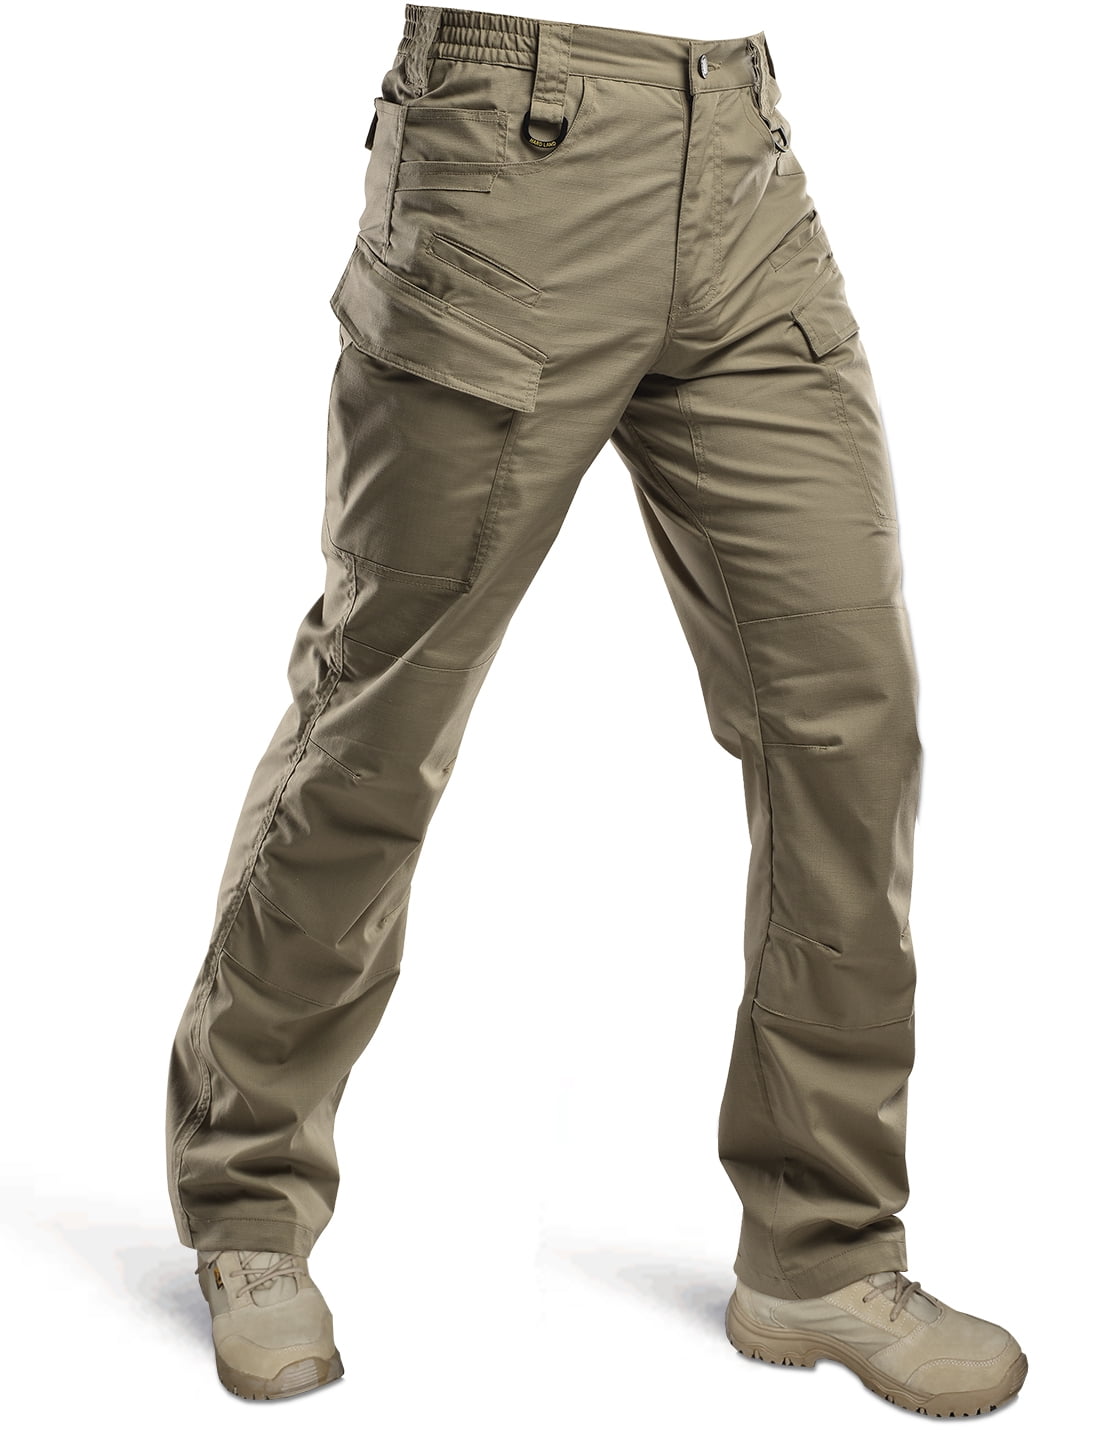 Men Tactical Waterproof Work Cargo Long Pants with Pockets Loose Trousers US